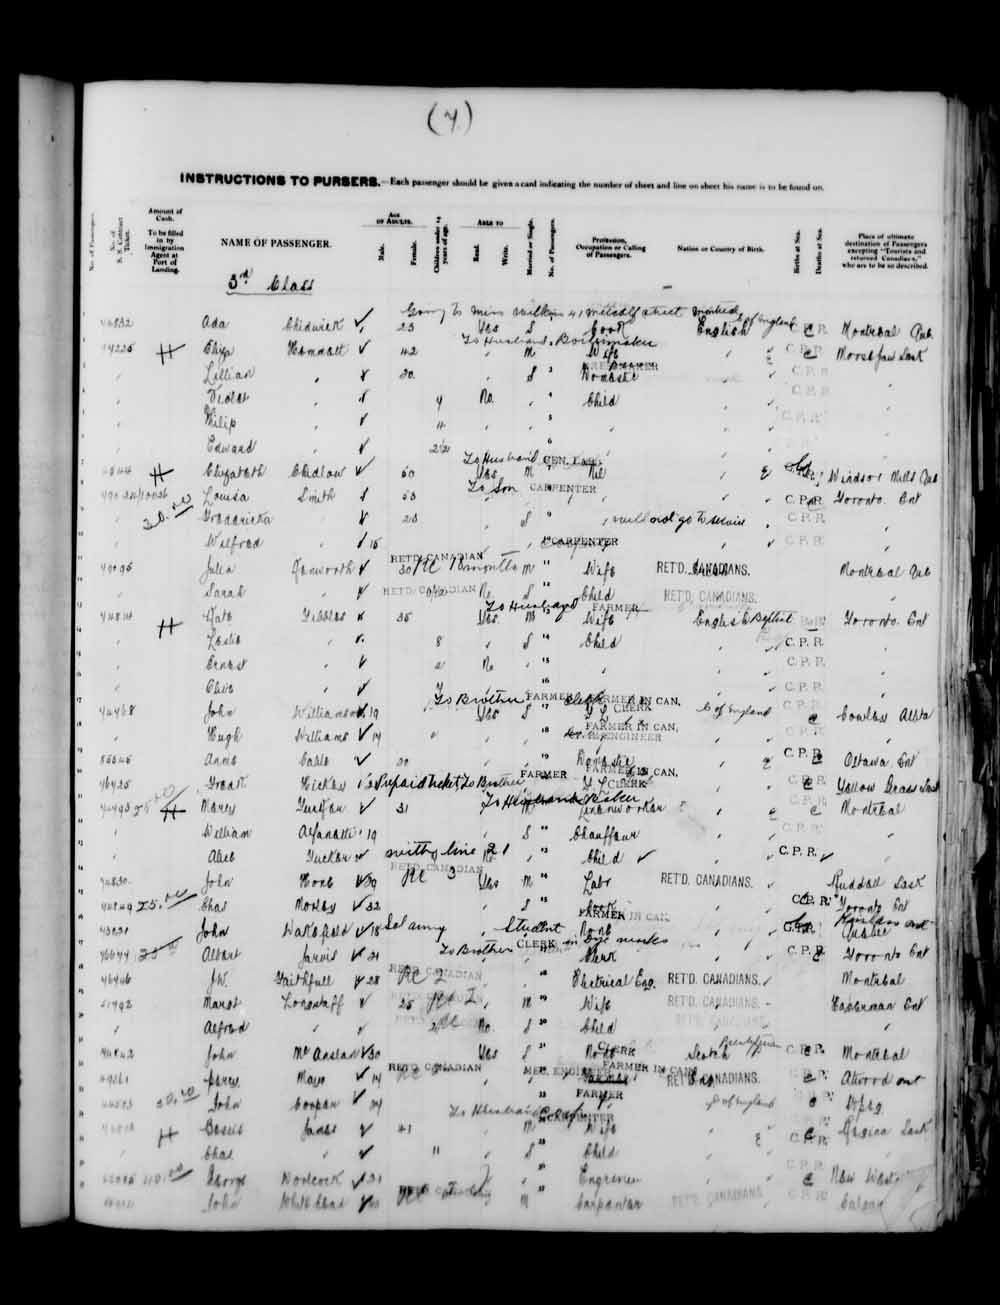 Digitized page of Quebec Passenger Lists for Image No.: e003591578